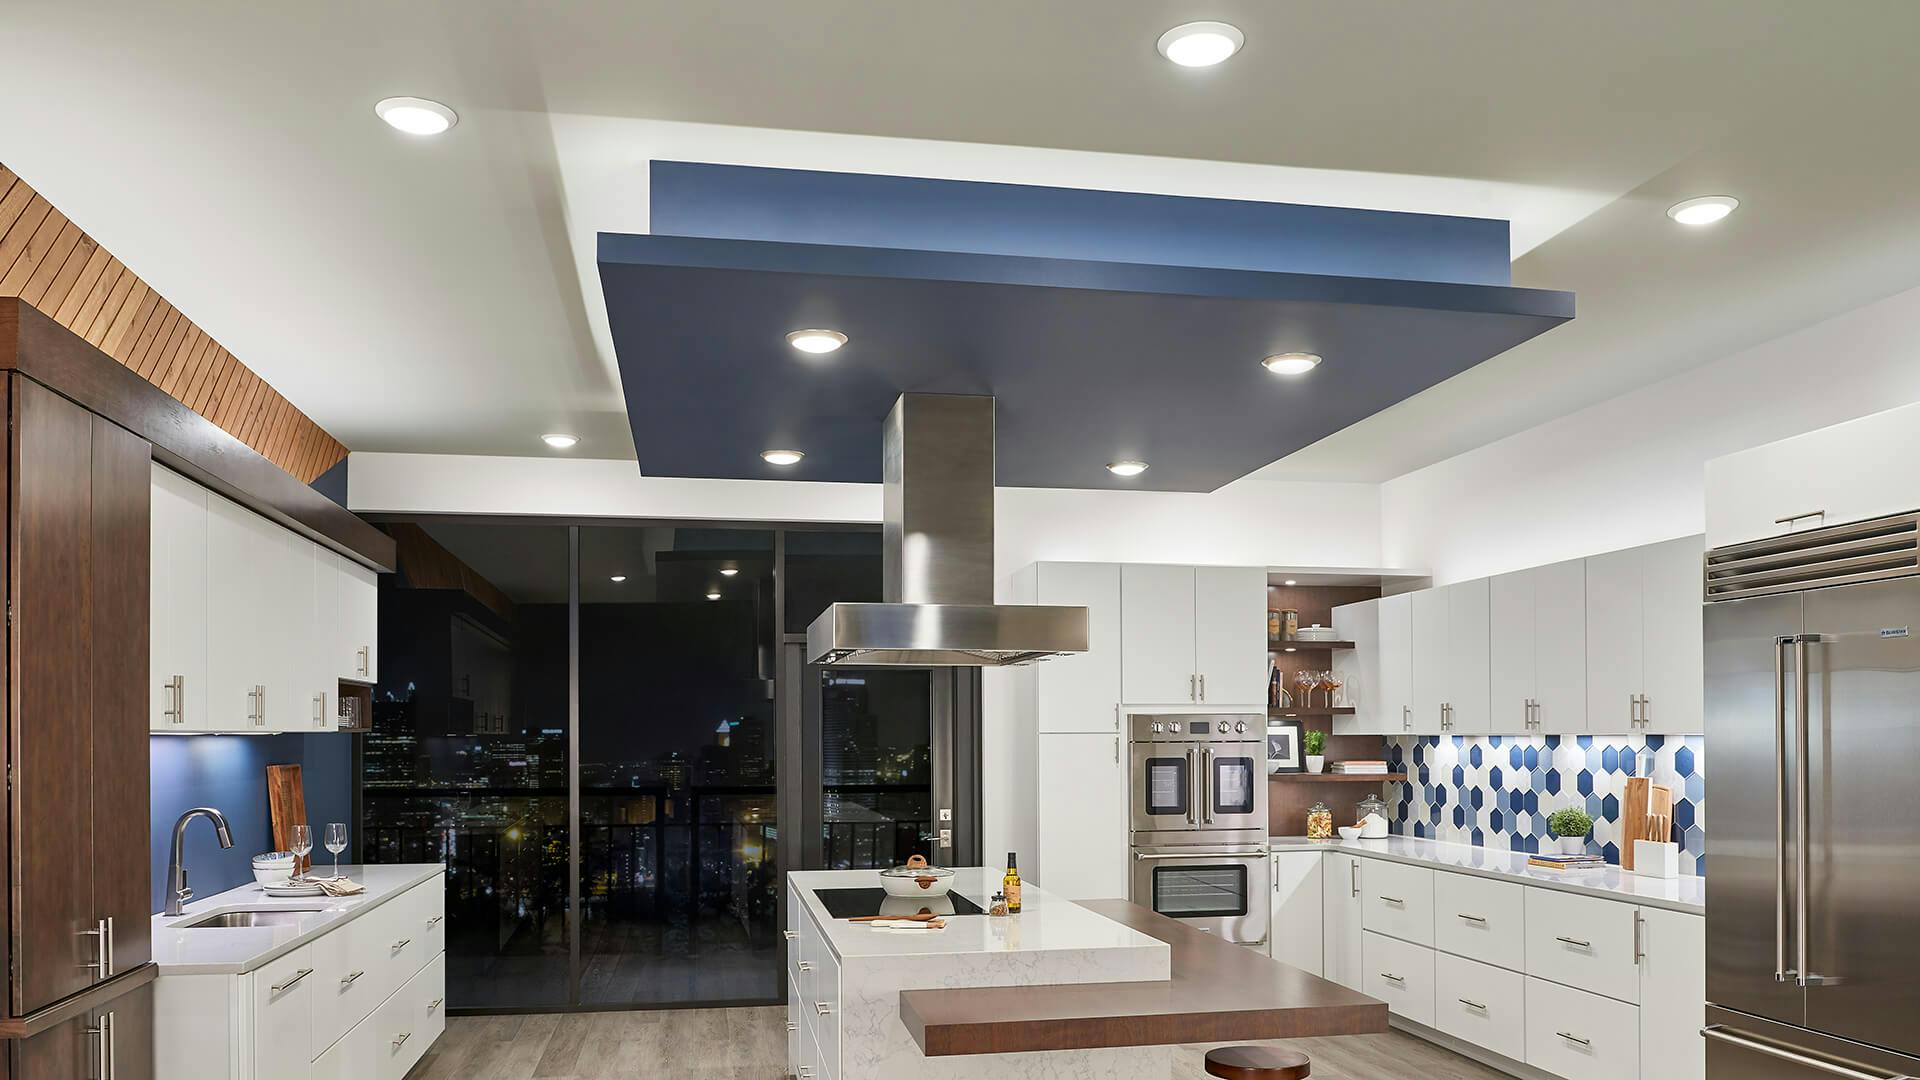 Open space kitchen with downlights.